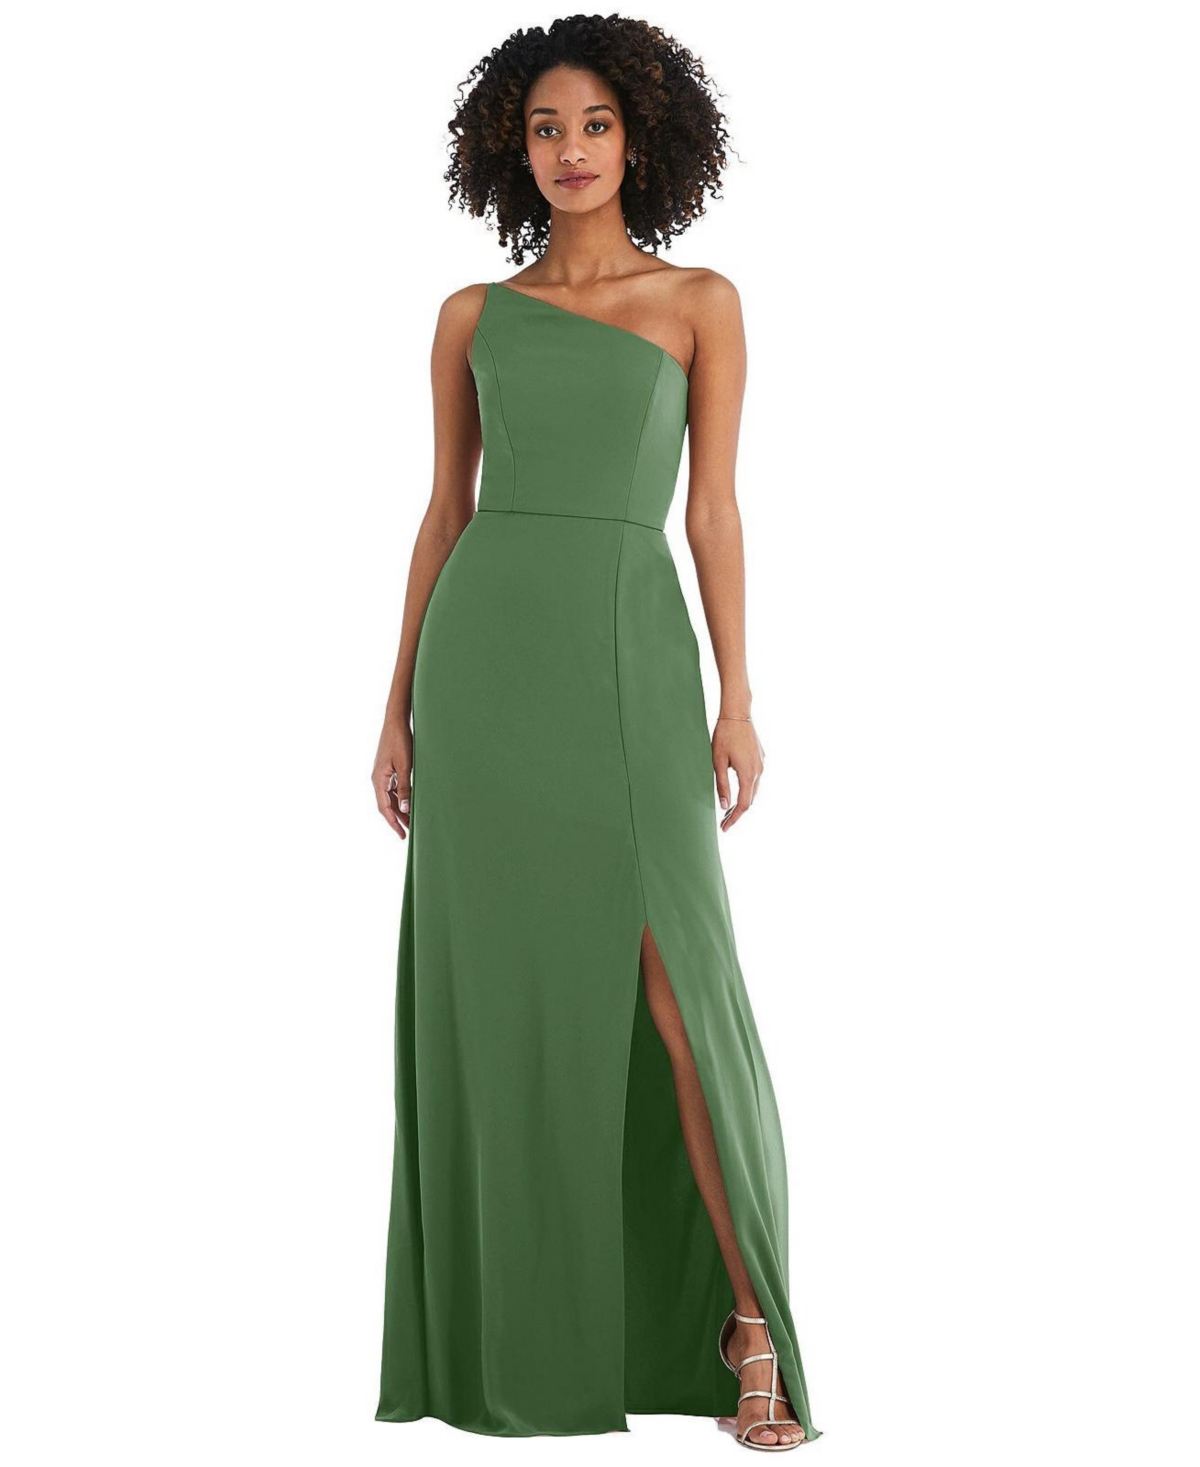 Women's Skinny One-Shoulder Trumpet Gown with Front Slit - Vineyard green